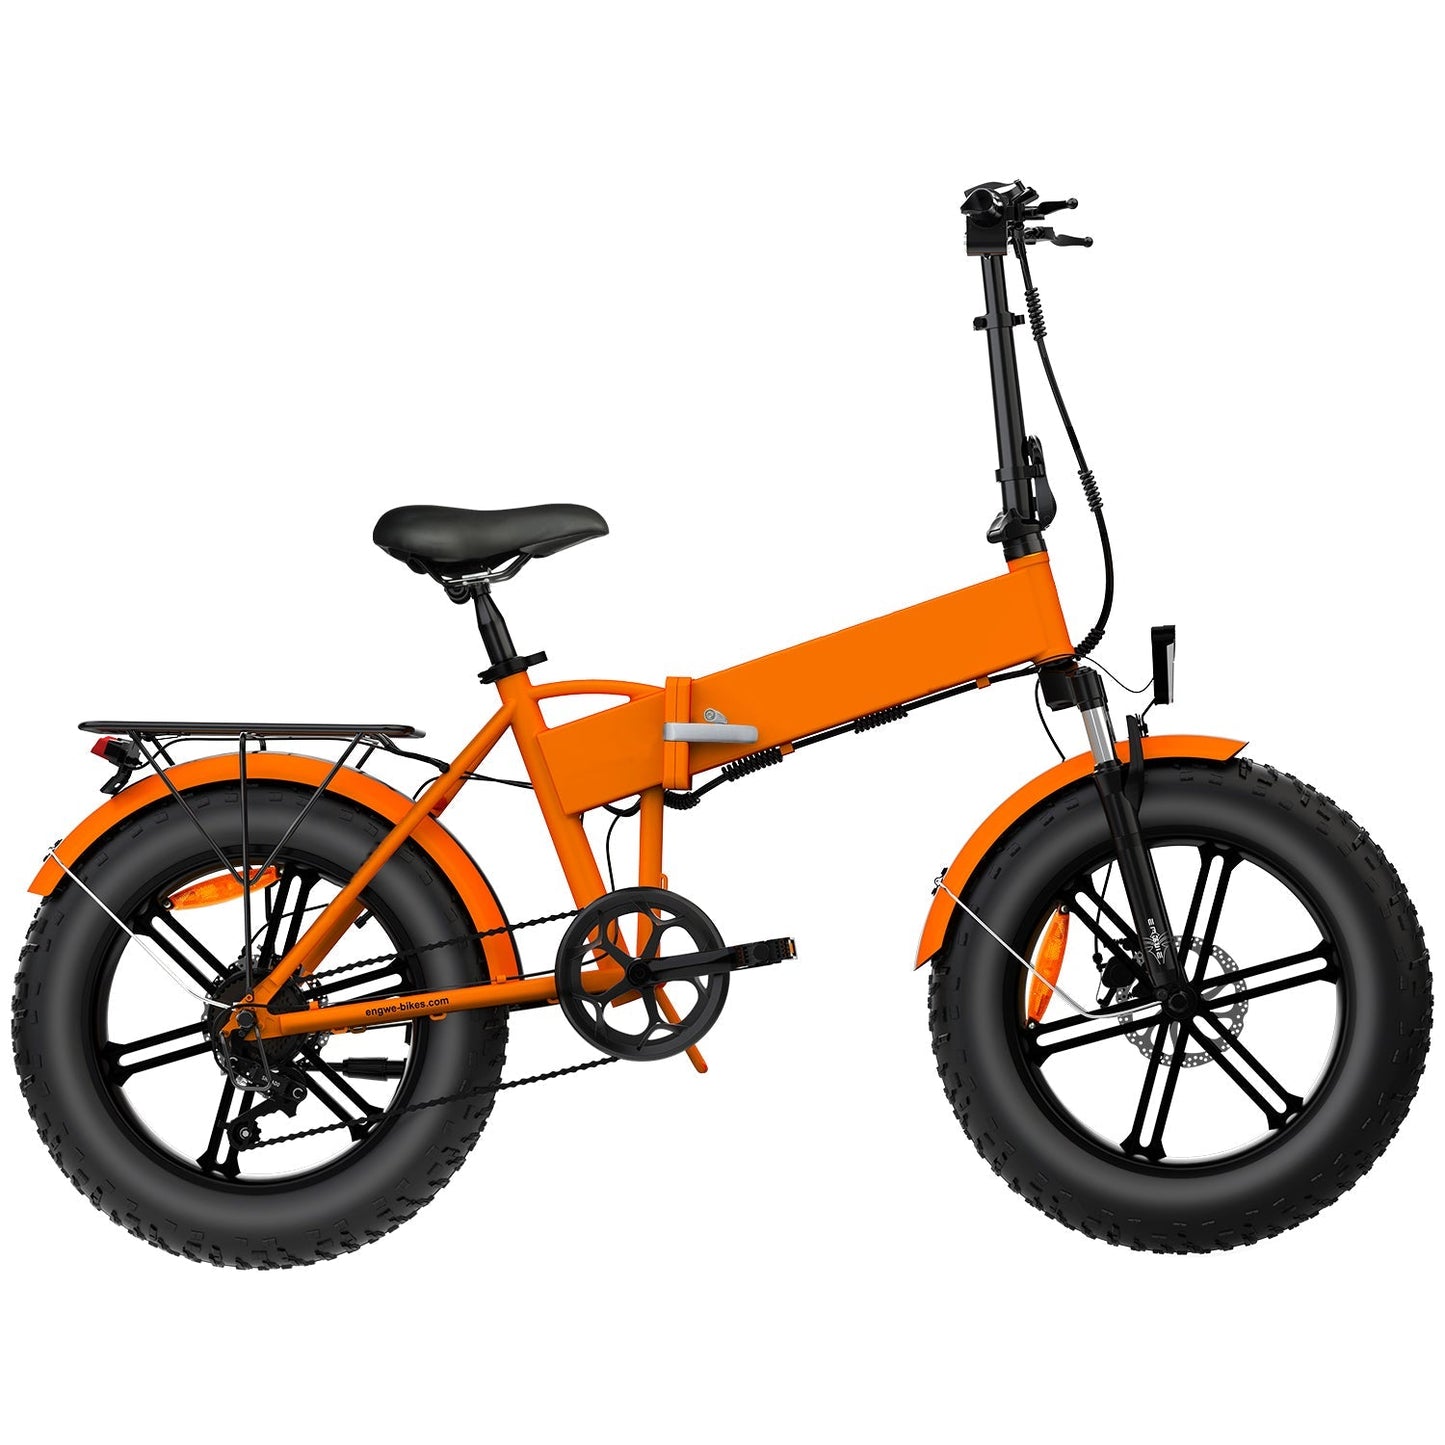 PL Warehouse Stock GYL051 20*4.0" Fat Tire Electric Bike with 750W Motor 48V 13Ah Battery